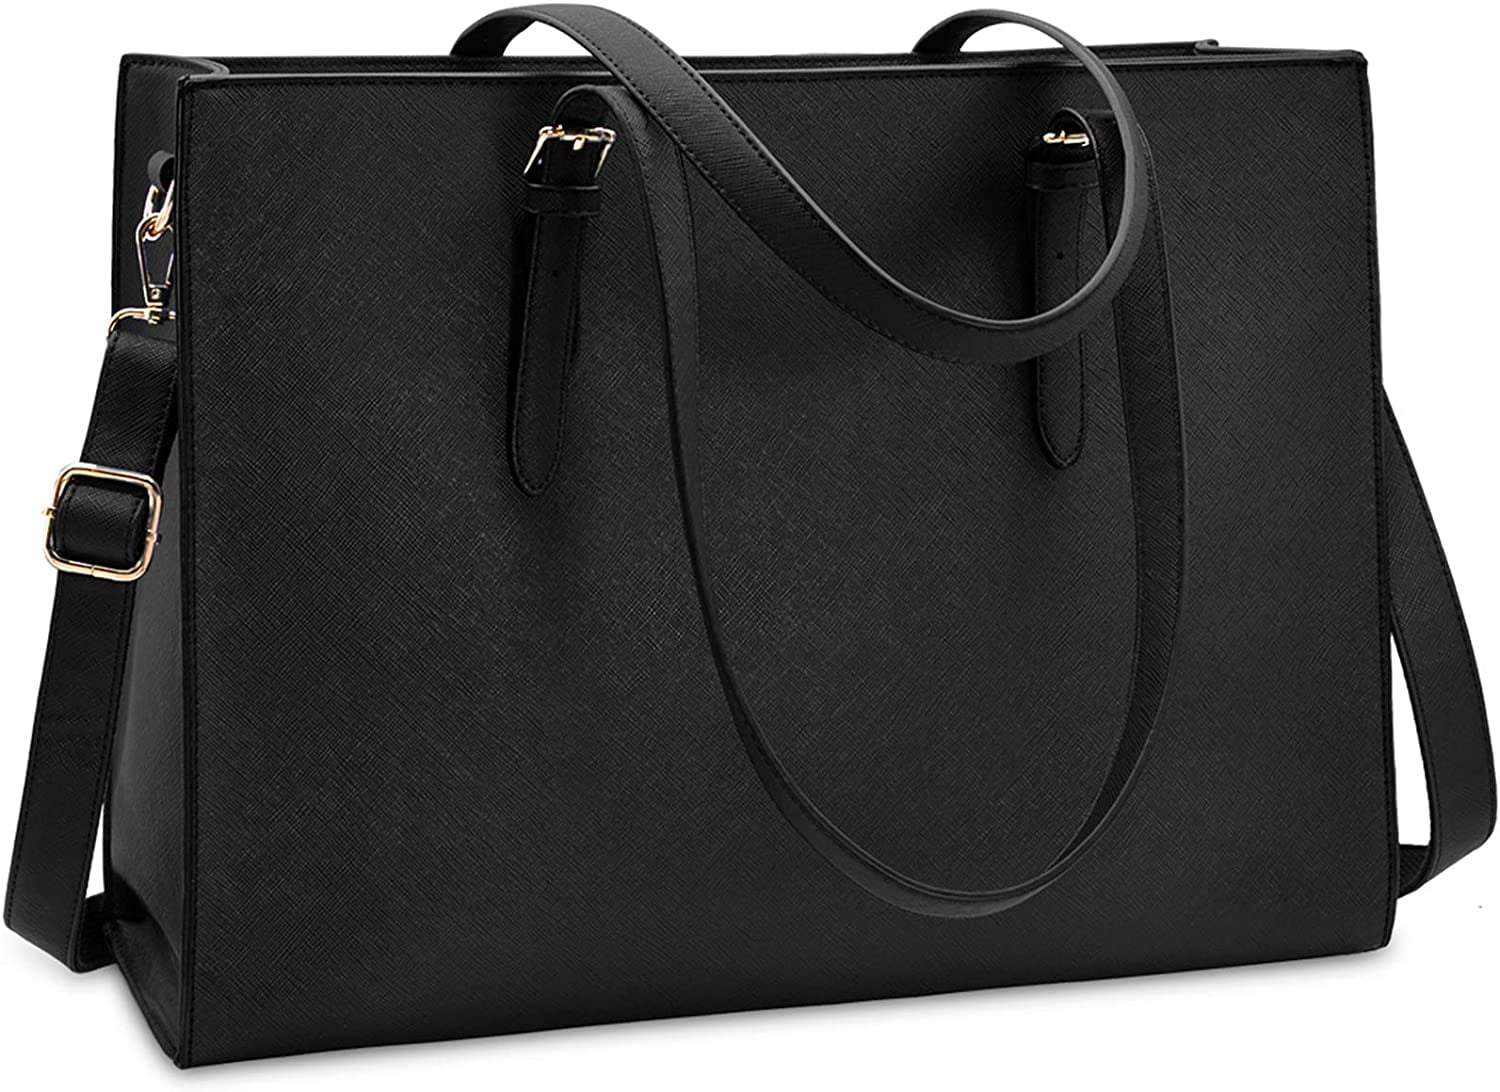 Laptop Bag for Women 15.6 Inch Laptop Tote Bag Waterproof Leather Computer  Tote Bag Business Lightwe…See more Laptop Bag for Women 15.6 Inch Laptop